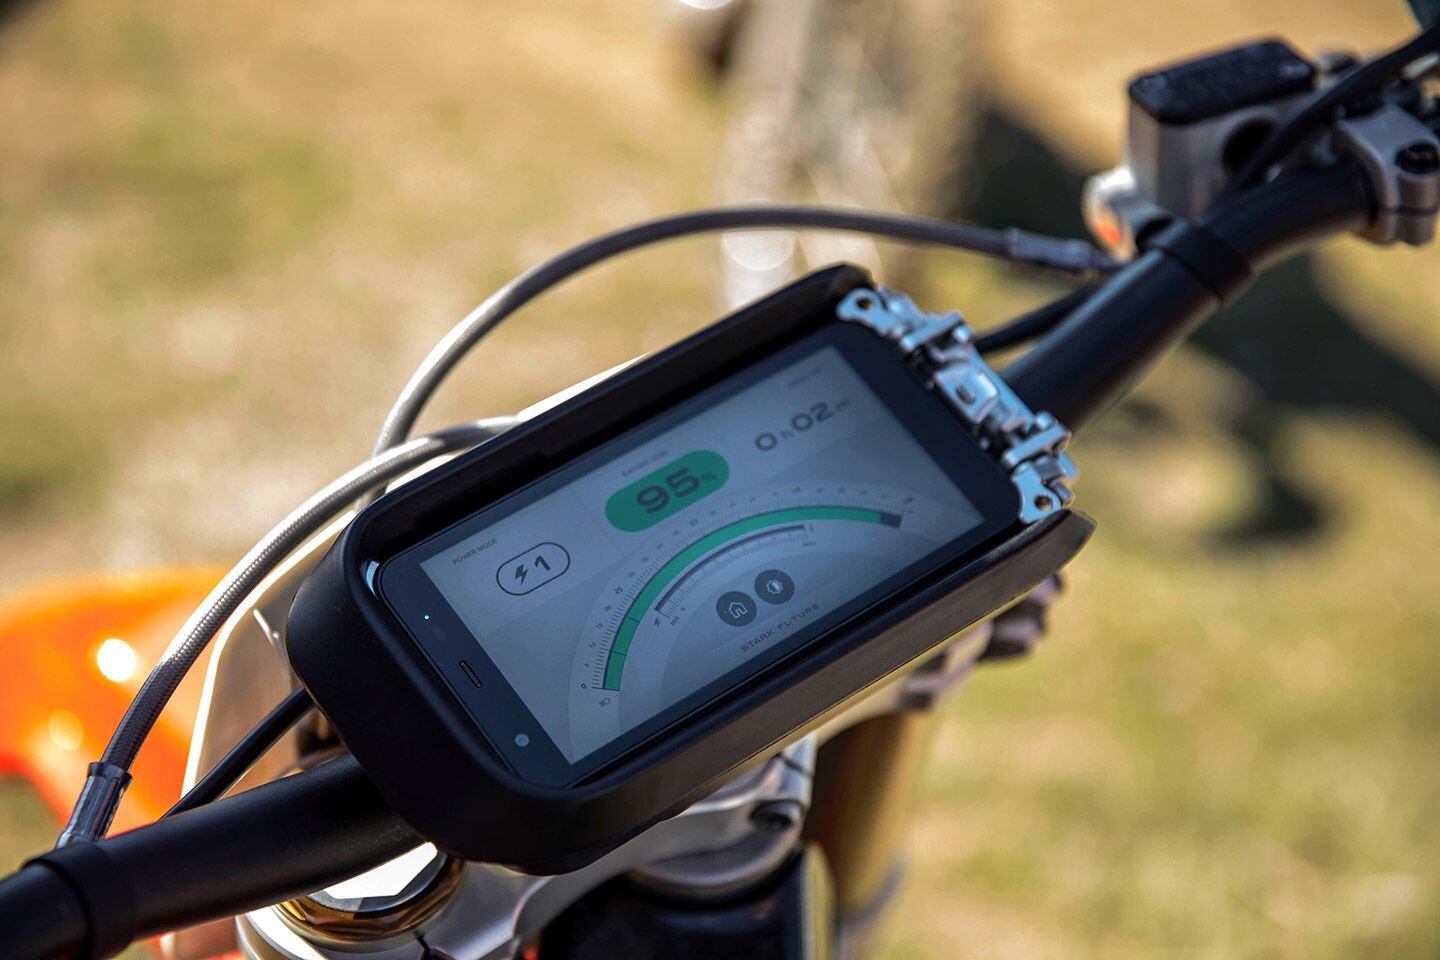 An Android smartphone “dashboard” comes with the bike. Clean, readable, and bright.